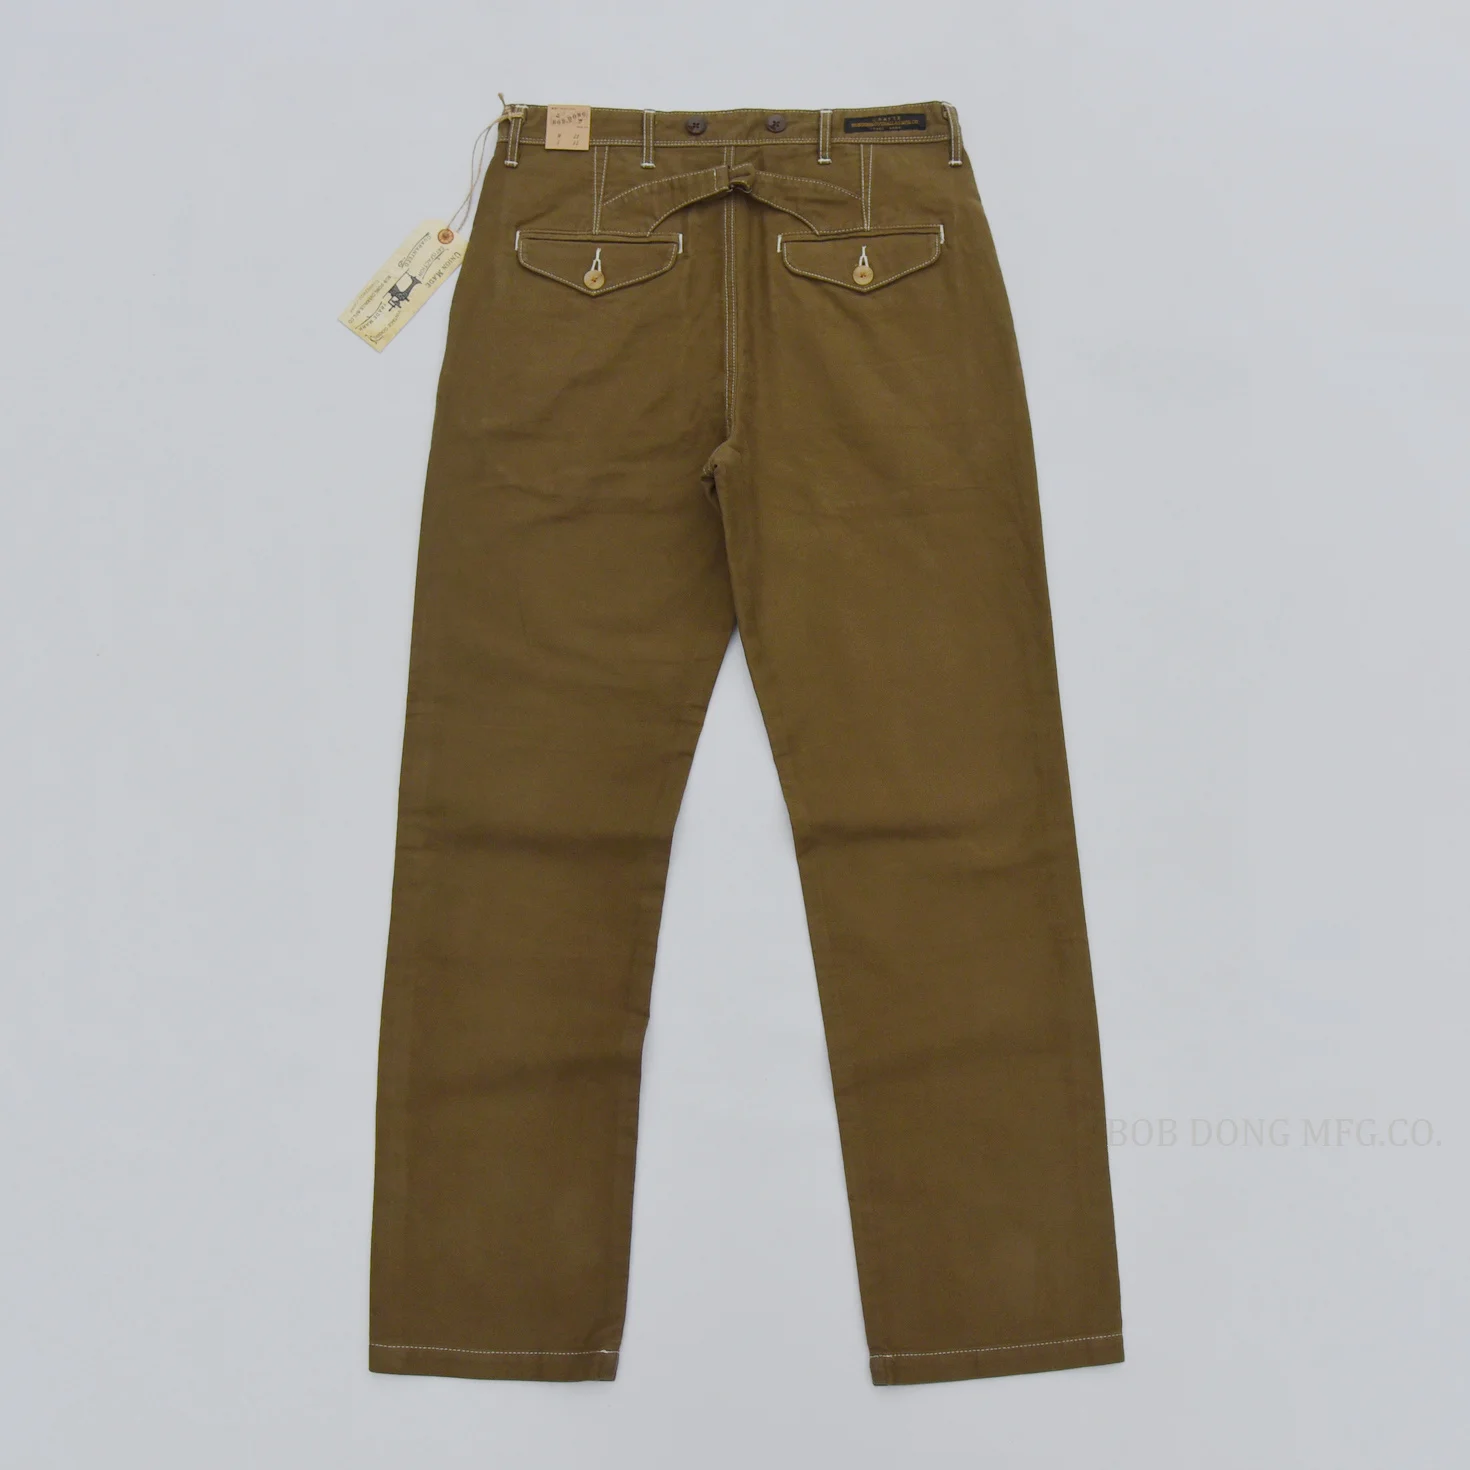 

Casual BOB DONG Twill Chino Vintage Style Men's Pants With Suspender Buttons